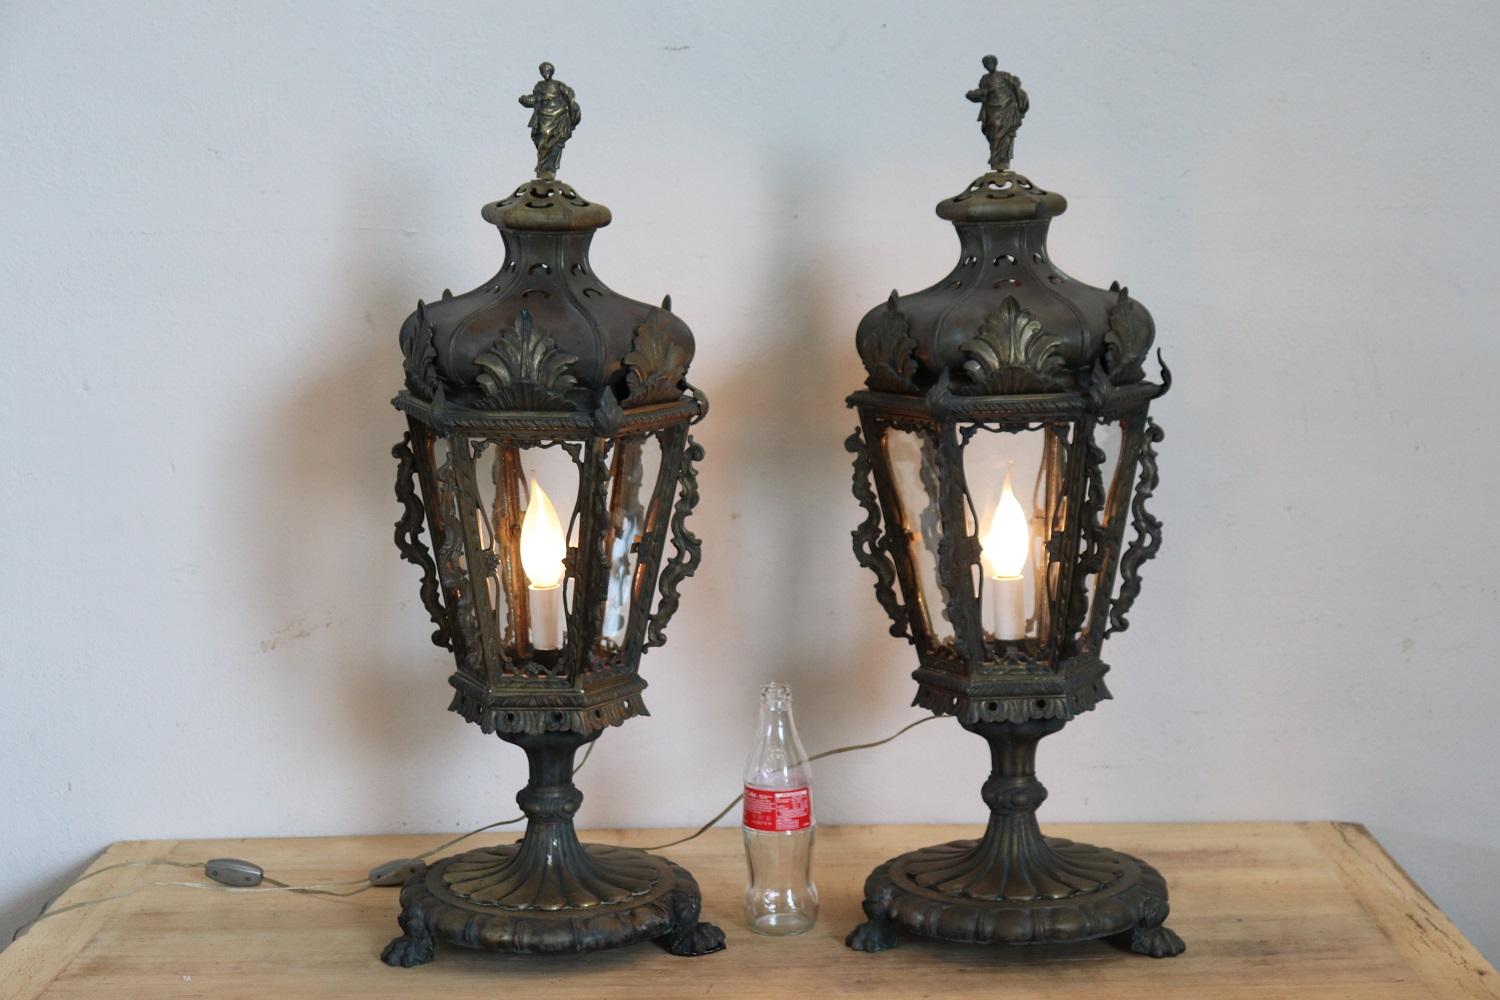 Beautiful early 20th century Italian pair of table lamps or lanterns in bronze. The bronze has acquired a beautiful antique patina. The bronze has an intricately carved decoration.